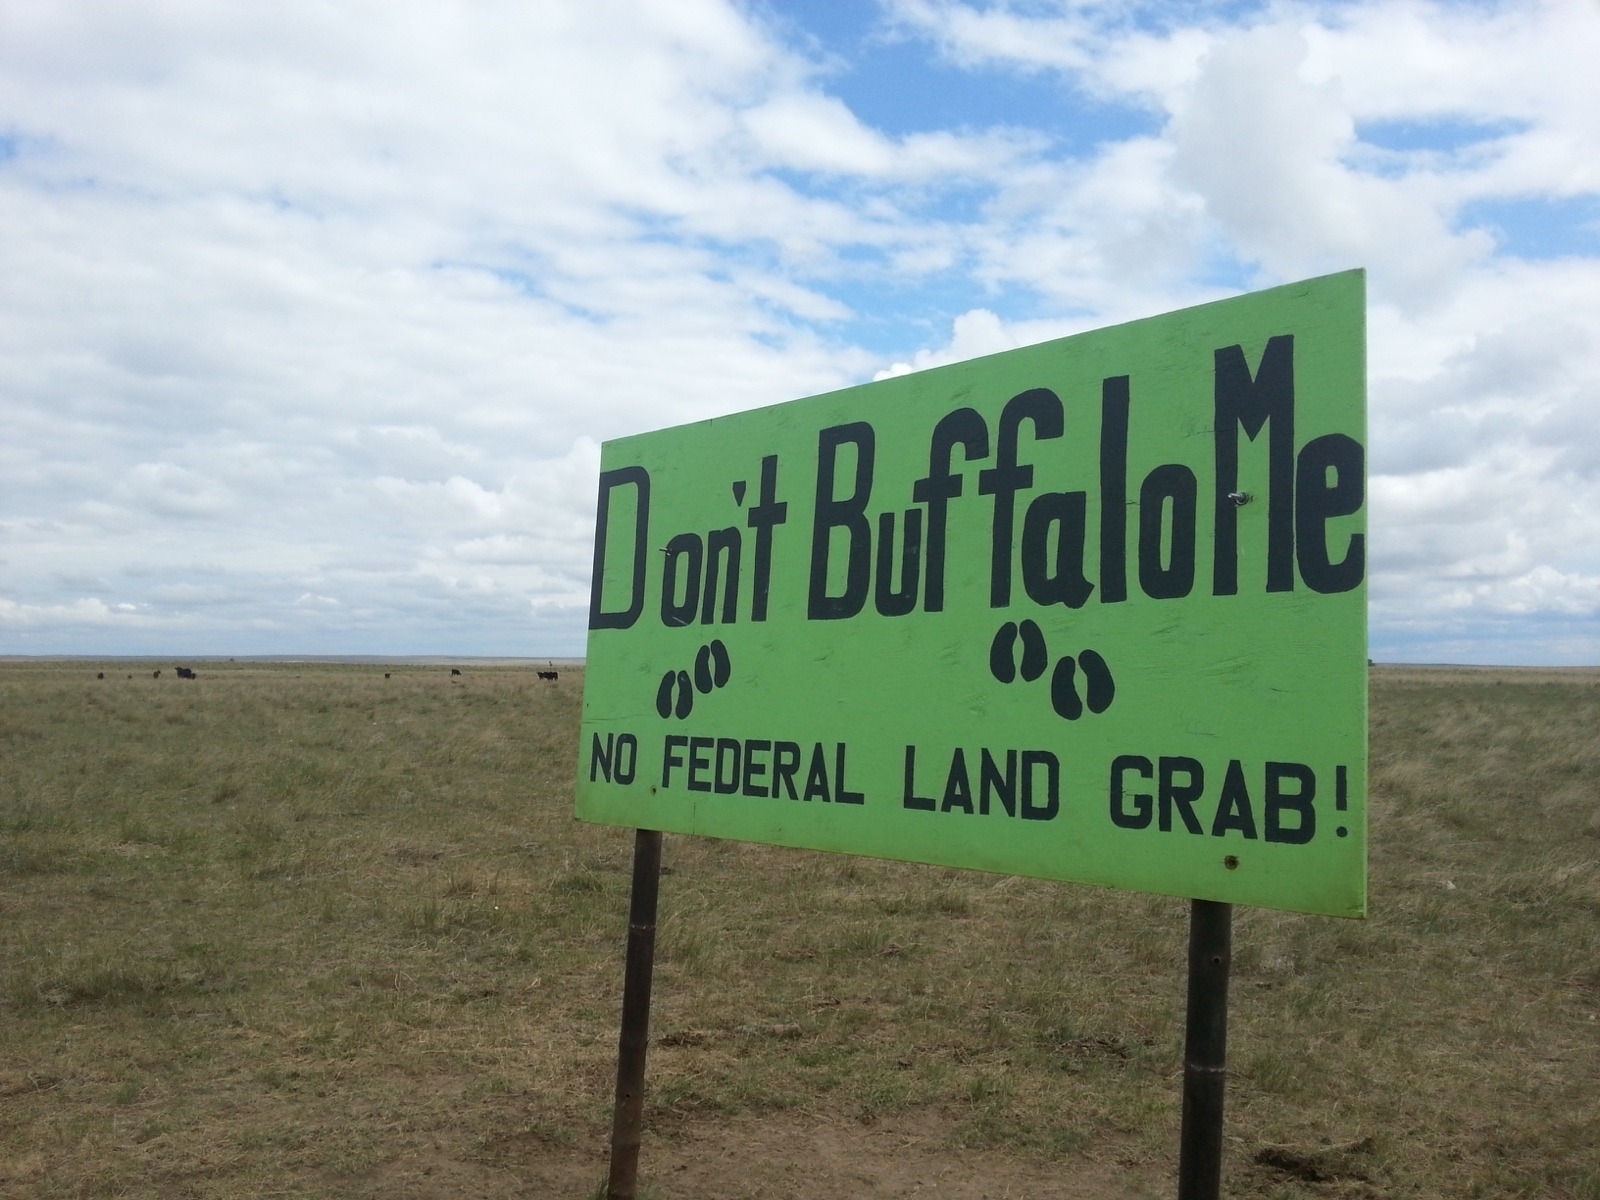 While some portray the debate over American Prairie Reserve as being about federal over-reach, many observers say it's really about recognition of private property rights. Photo courtesy Shawn Regan